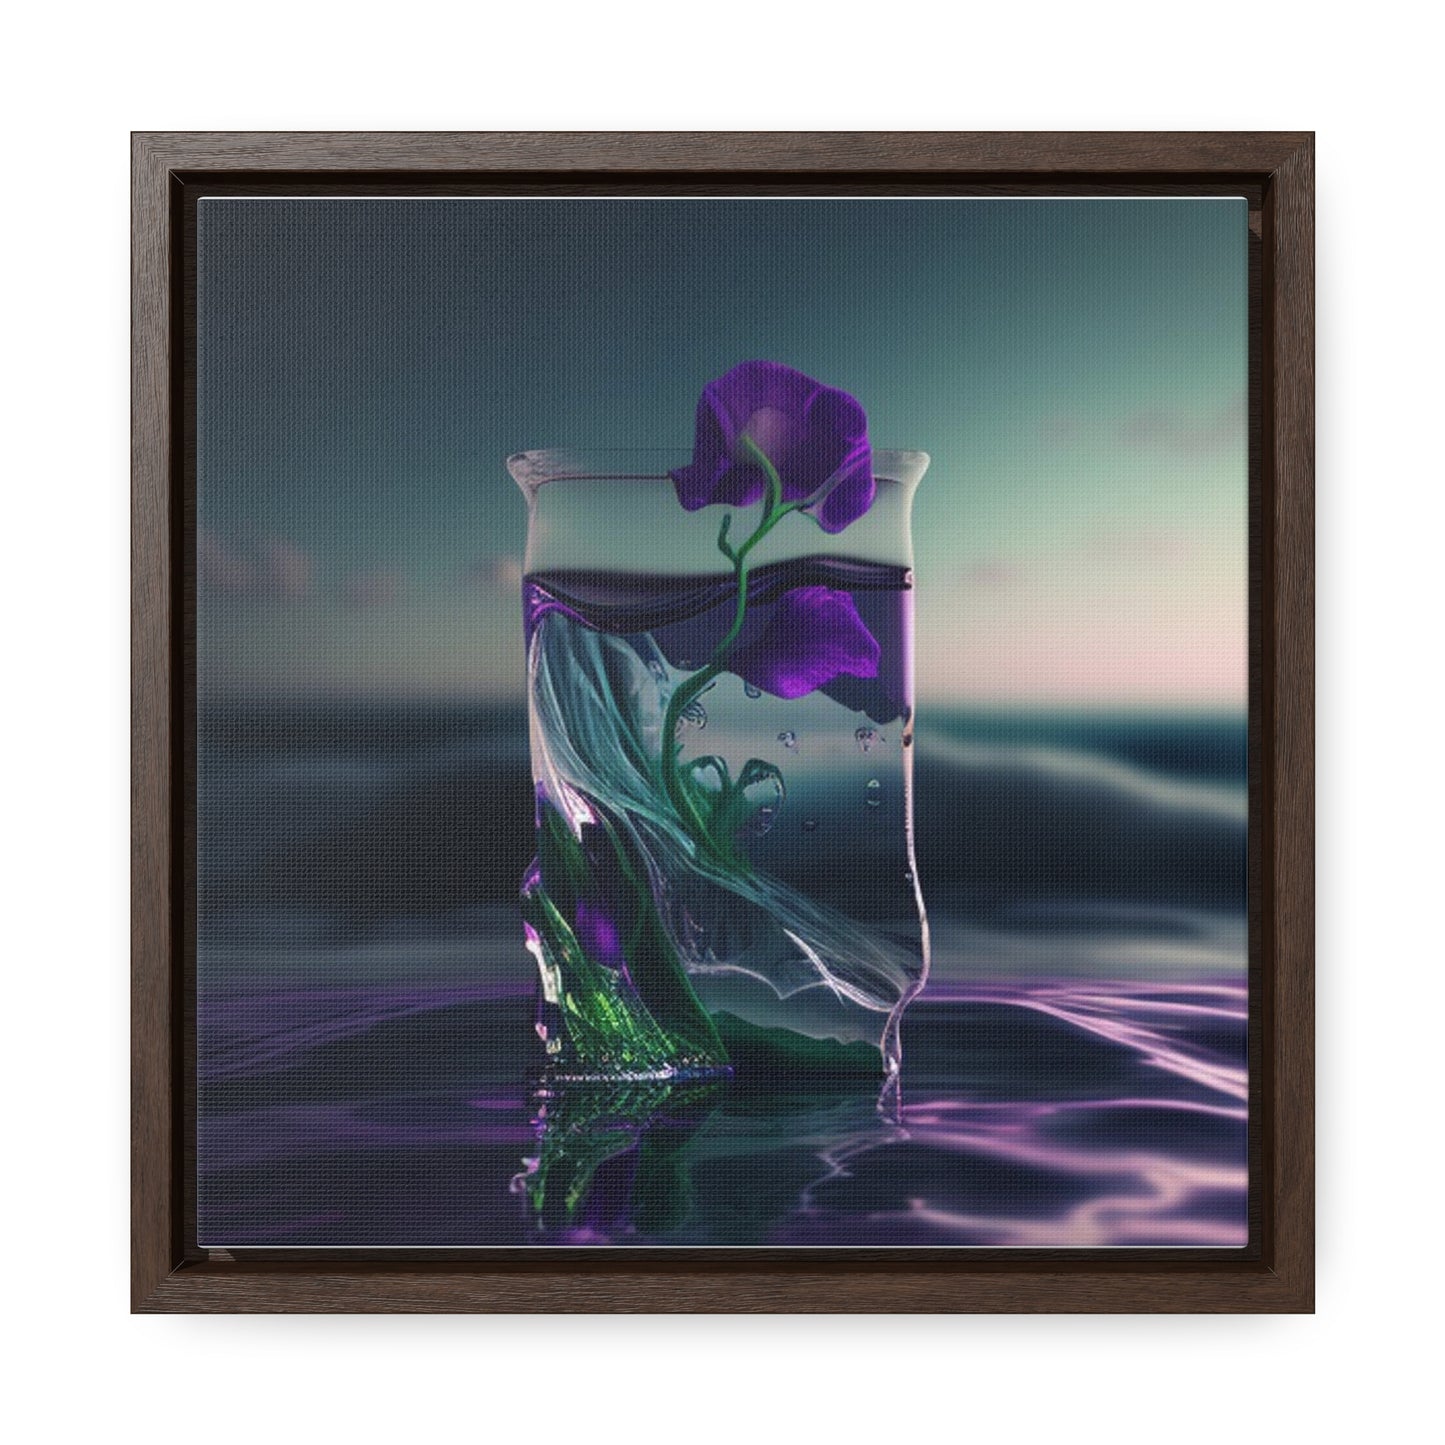 Gallery Canvas Wraps, Square Frame Purple Sweet pea in a vase 3